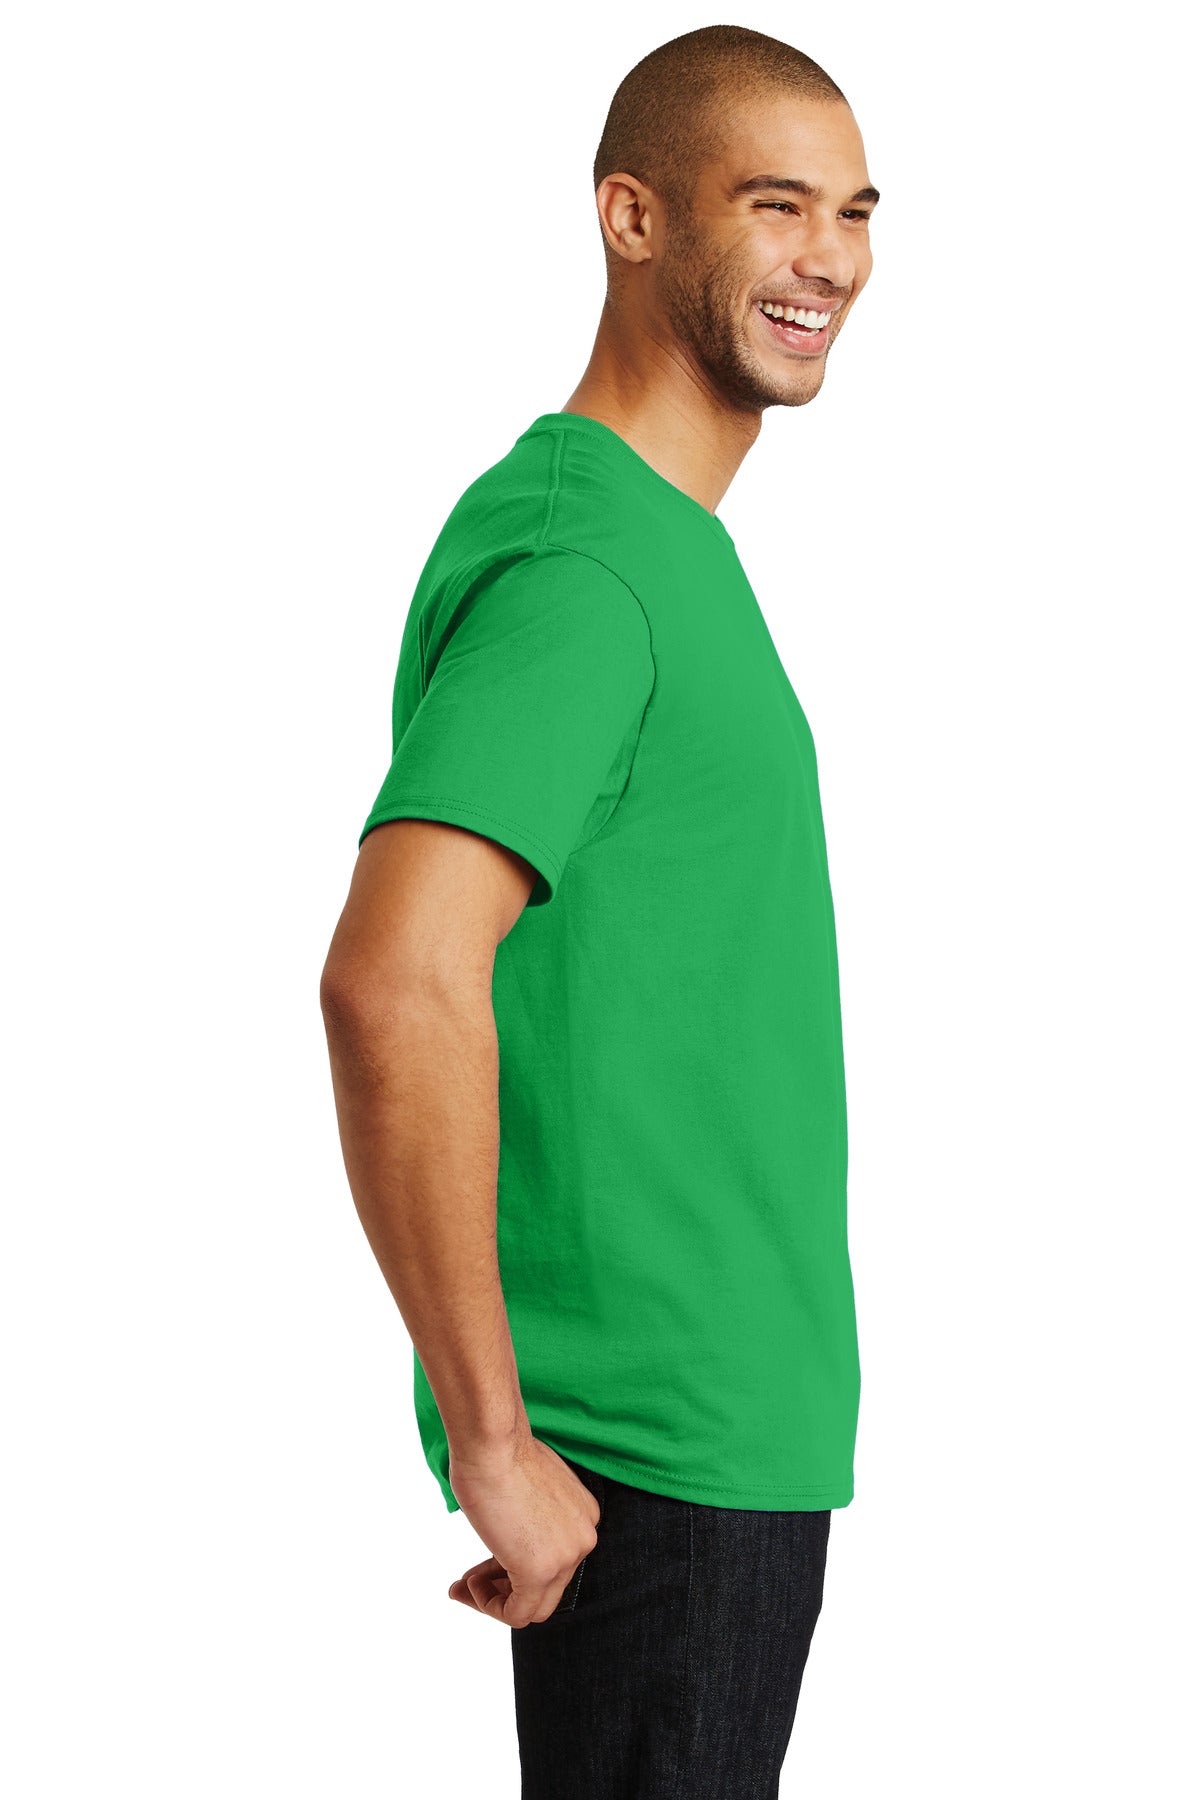 Hanes® - Authentic 100% Cotton T-Shirt. 5250 [Kelly Green] - DFW Impression